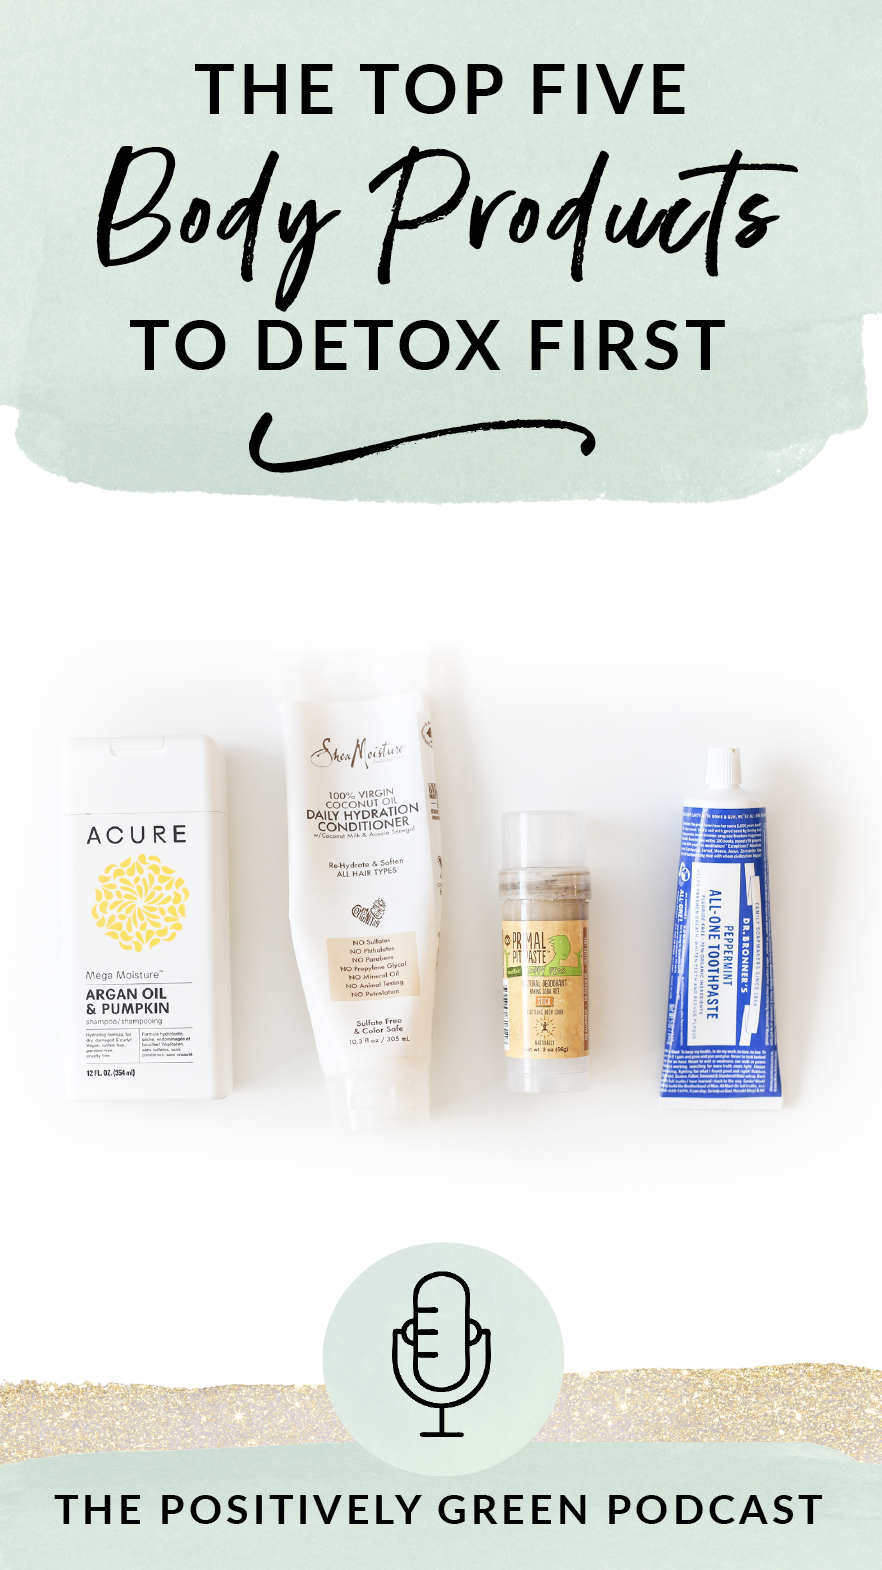 The top five body and beauty products you should detox first The Positively Green Podcast